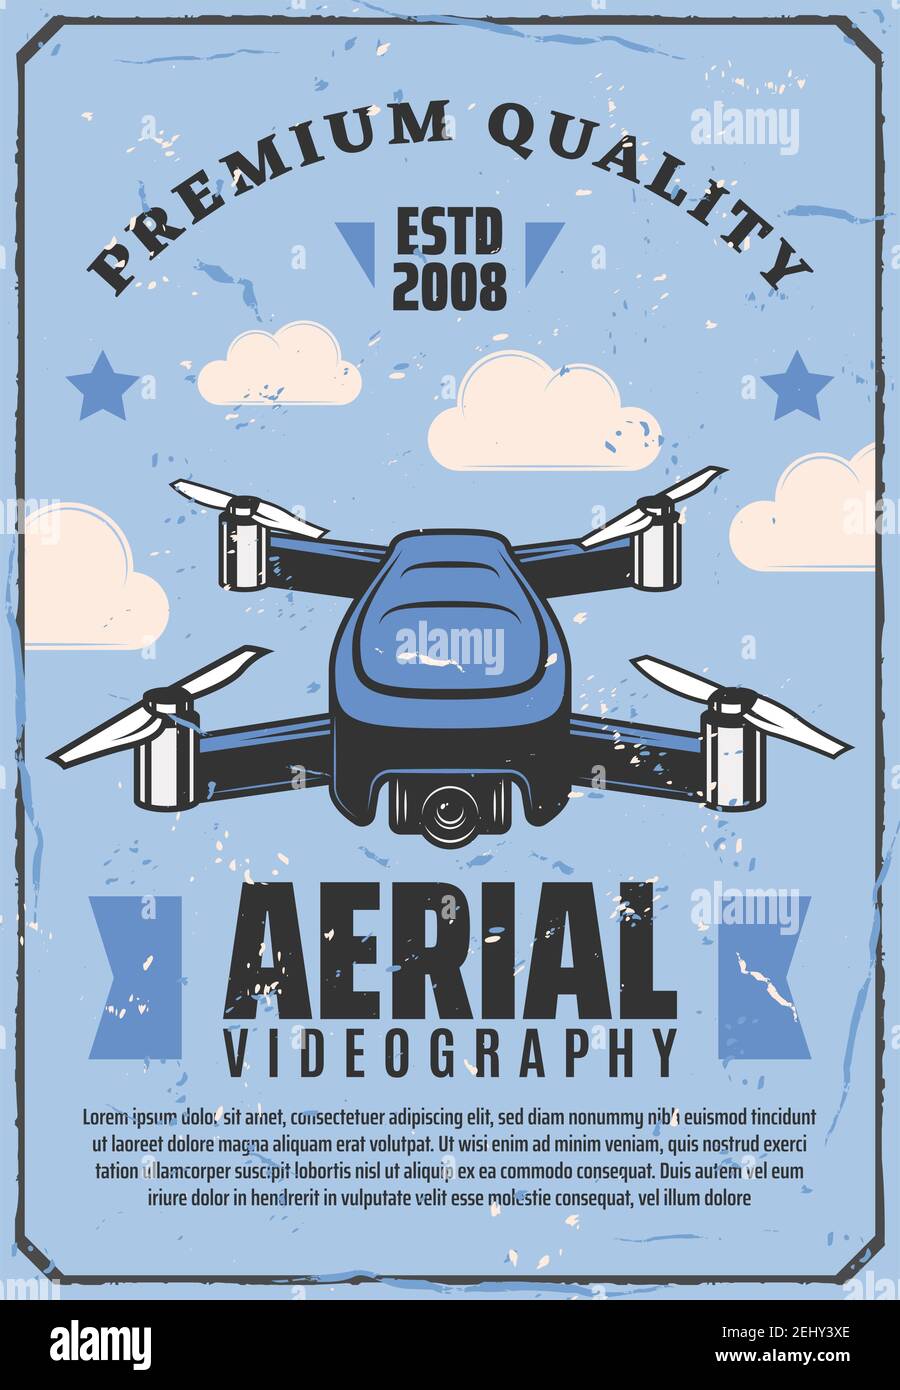 Drone and aerial videography poster. Vector smart device quadcopter or quadrotor helicopter with video camera for air shooting or photographing Stock Vector